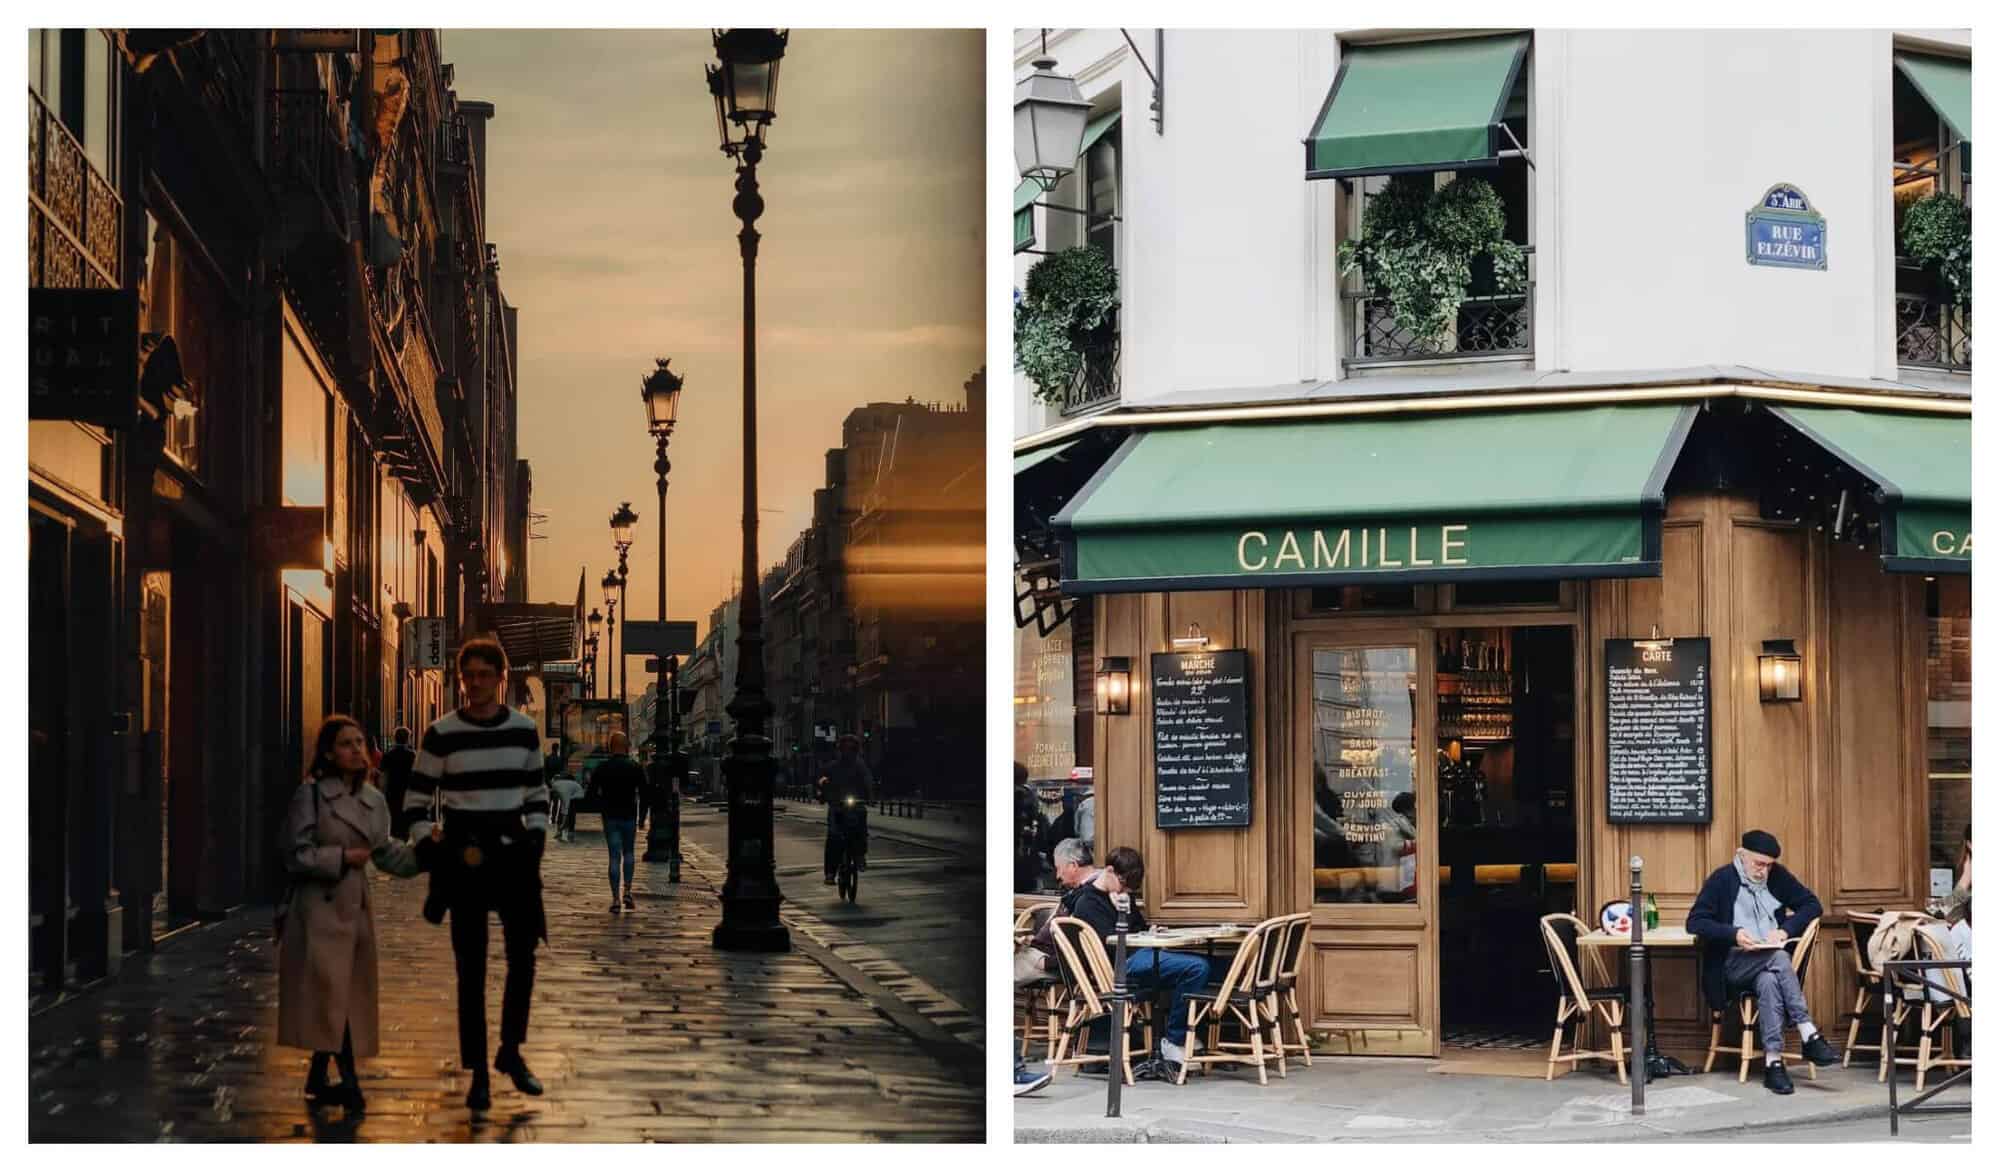 Left: A couple stroll hand in hand on a rainy Parisian evening, the streetlamps already lit. Right: An afternoon in cafe Camille, where patrons sit down to lunch.